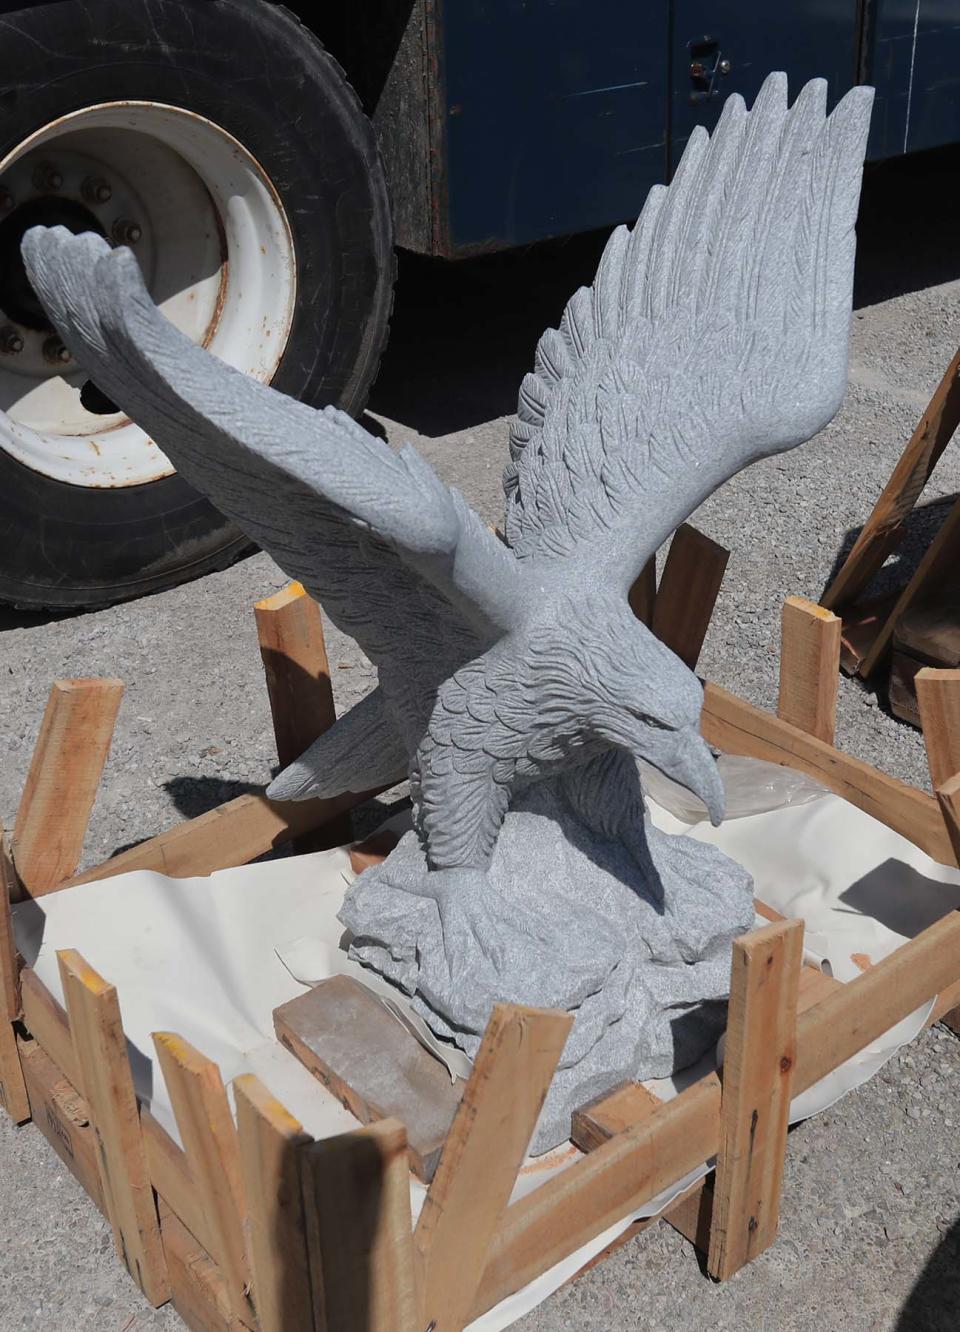 This eagle will be placed atop the granite marker for Howard Woodford, a WWII war hero from Barberton.